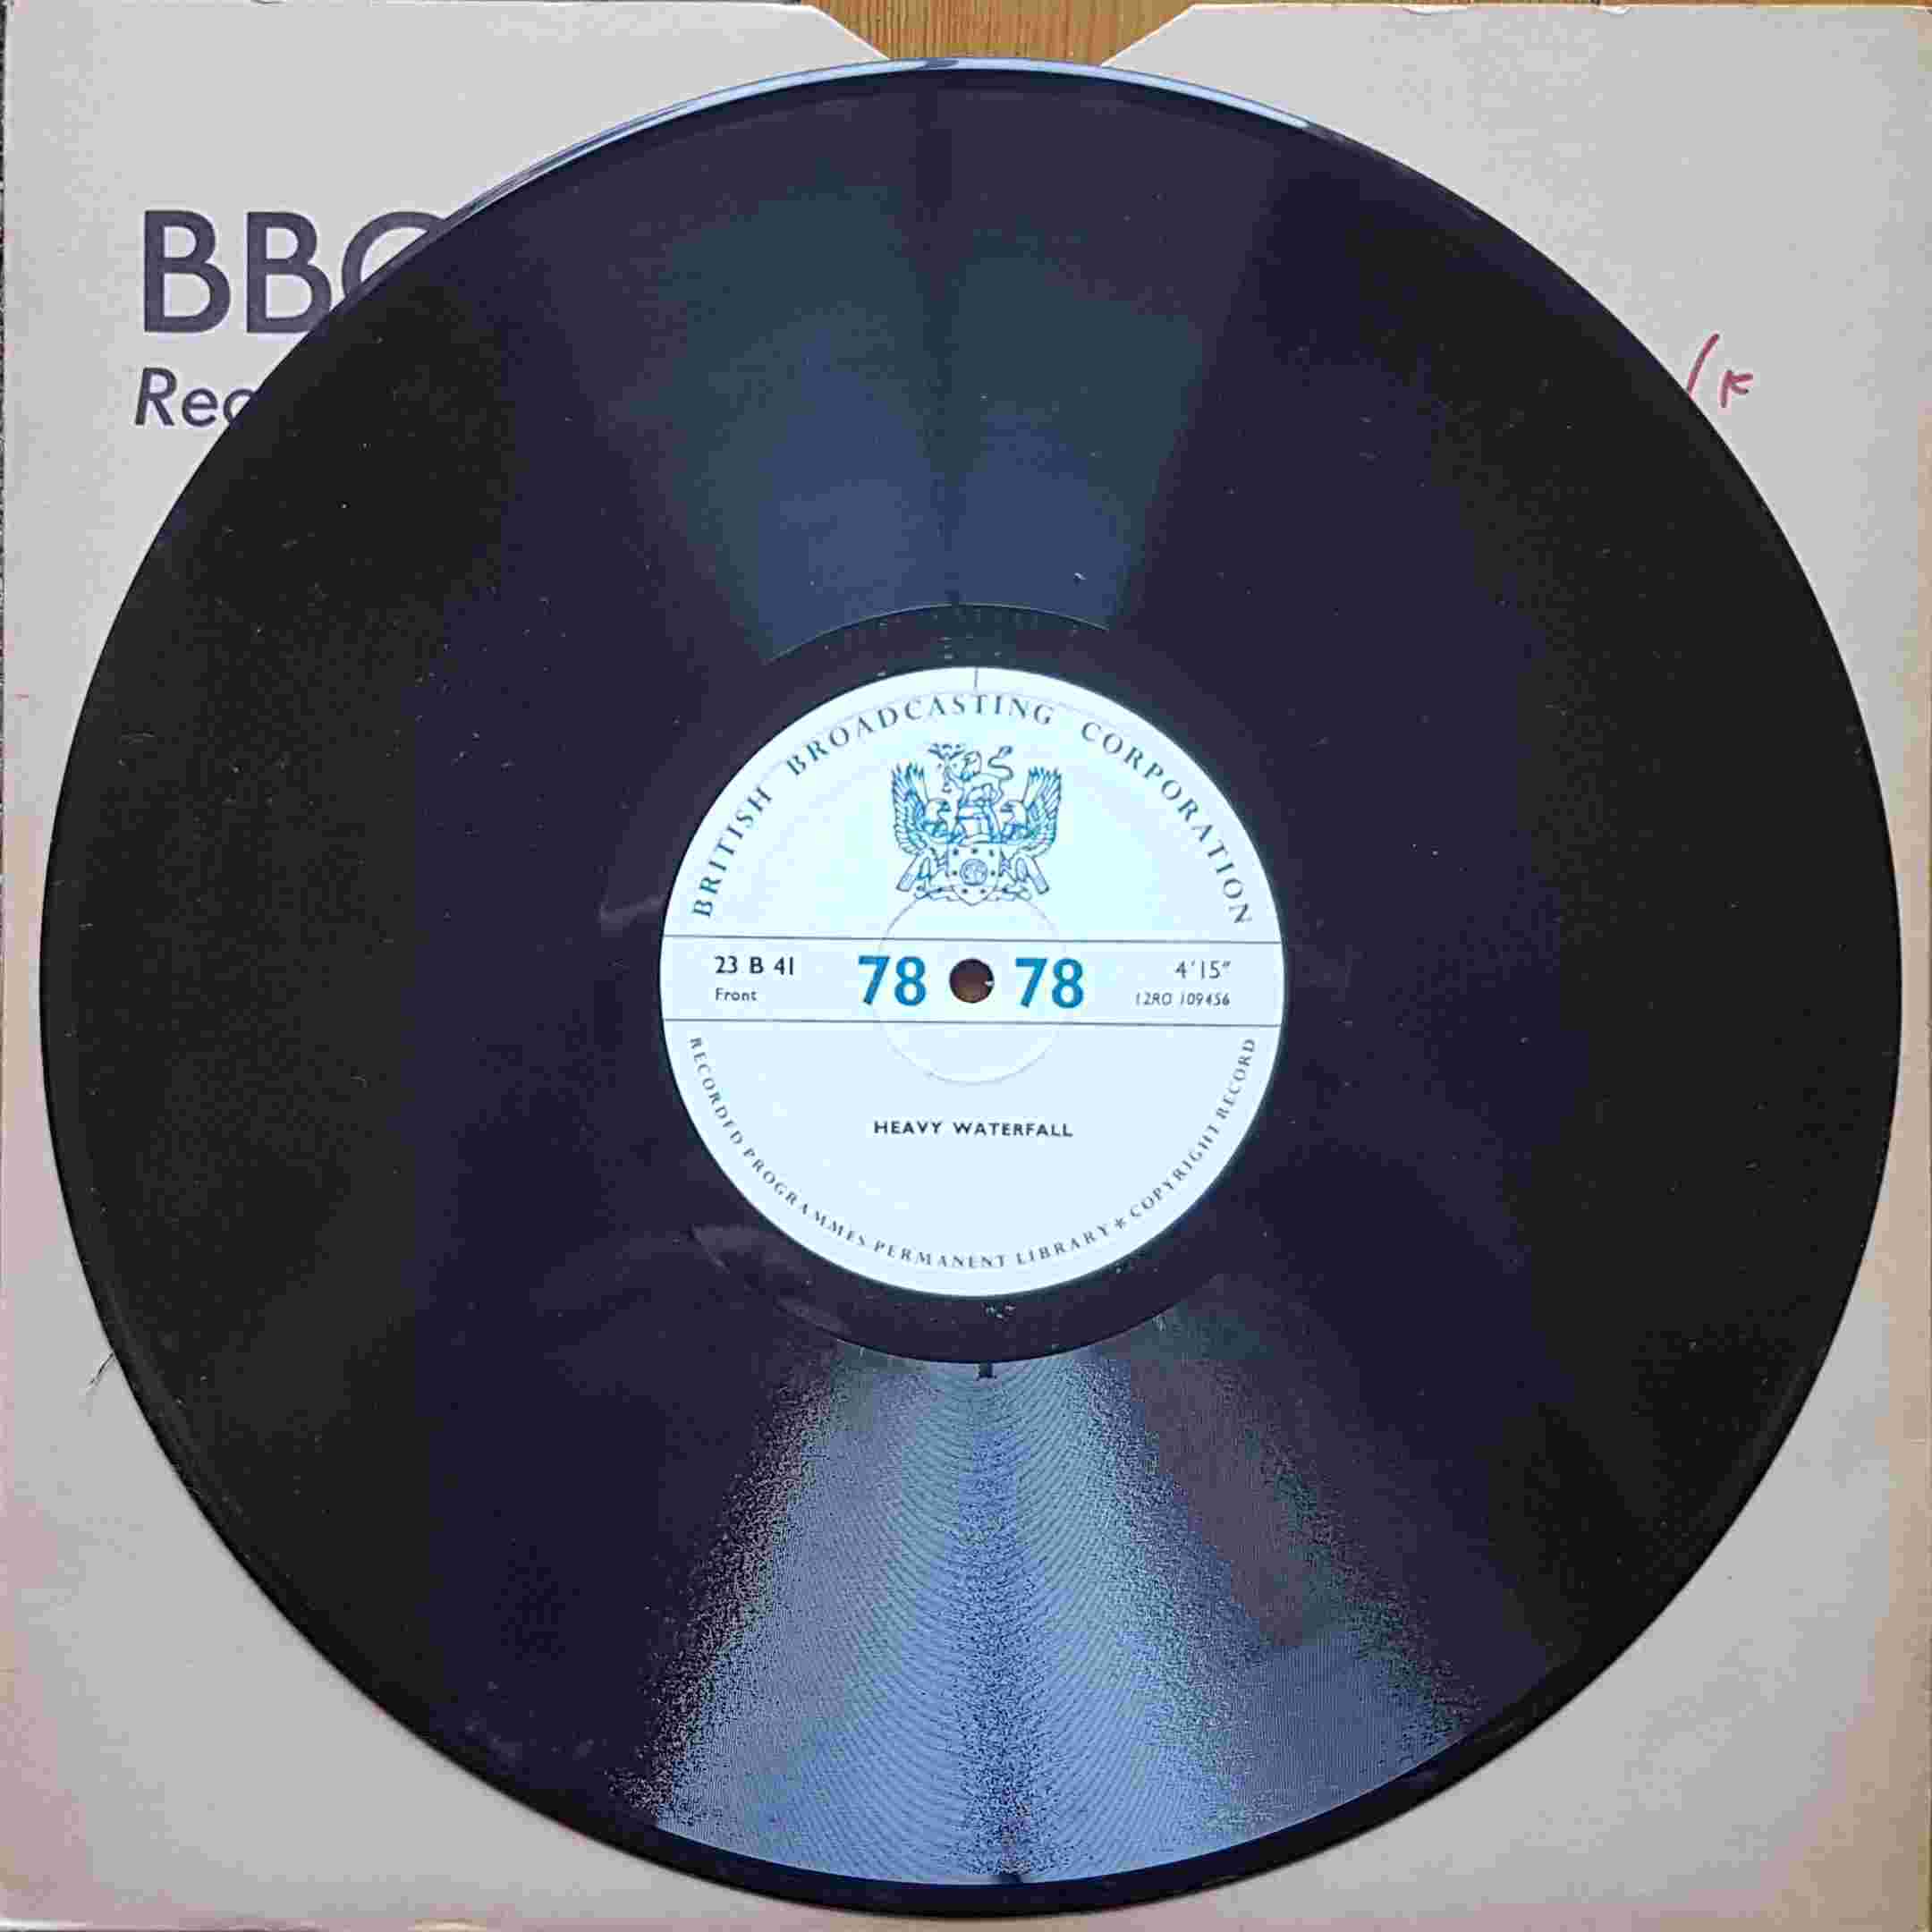 Picture of 23 B 41 Heavy waterfall by artist Not registered from the BBC 78 - Records and Tapes library